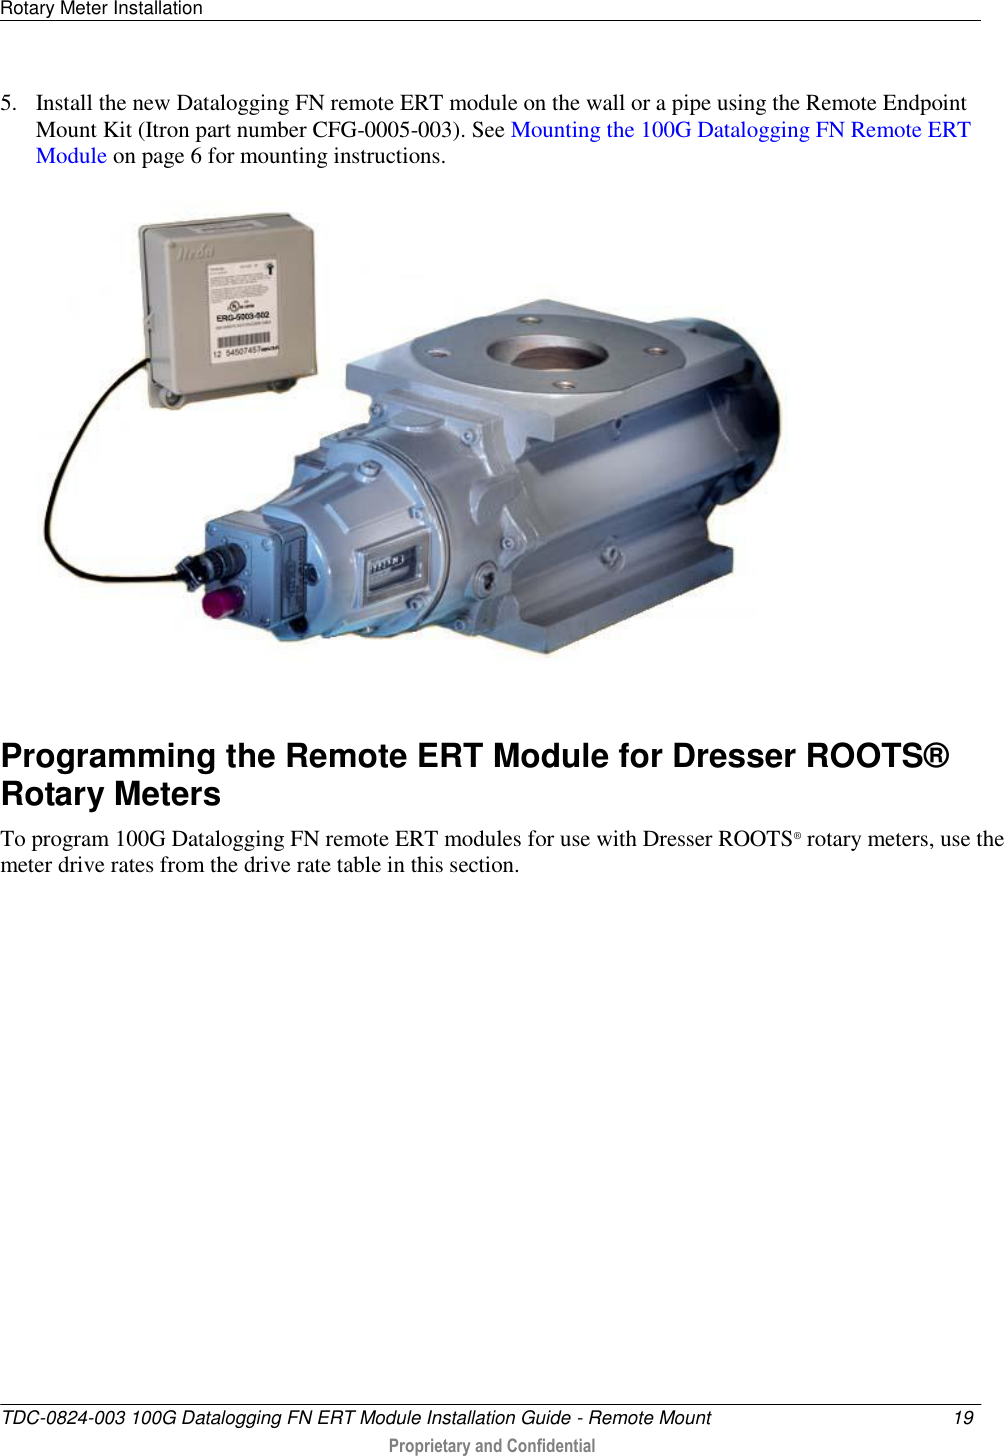 Rotary Meter Installation   TDC-0824-003 100G Datalogging FN ERT Module Installation Guide - Remote Mount  19   Proprietary and Confidential     5. Install the new Datalogging FN remote ERT module on the wall or a pipe using the Remote Endpoint Mount Kit (Itron part number CFG-0005-003). See Mounting the 100G Datalogging FN Remote ERT Module on page 6 for mounting instructions.  Programming the Remote ERT Module for Dresser ROOTS® Rotary Meters To program 100G Datalogging FN remote ERT modules for use with Dresser ROOTS® rotary meters, use the meter drive rates from the drive rate table in this section.   